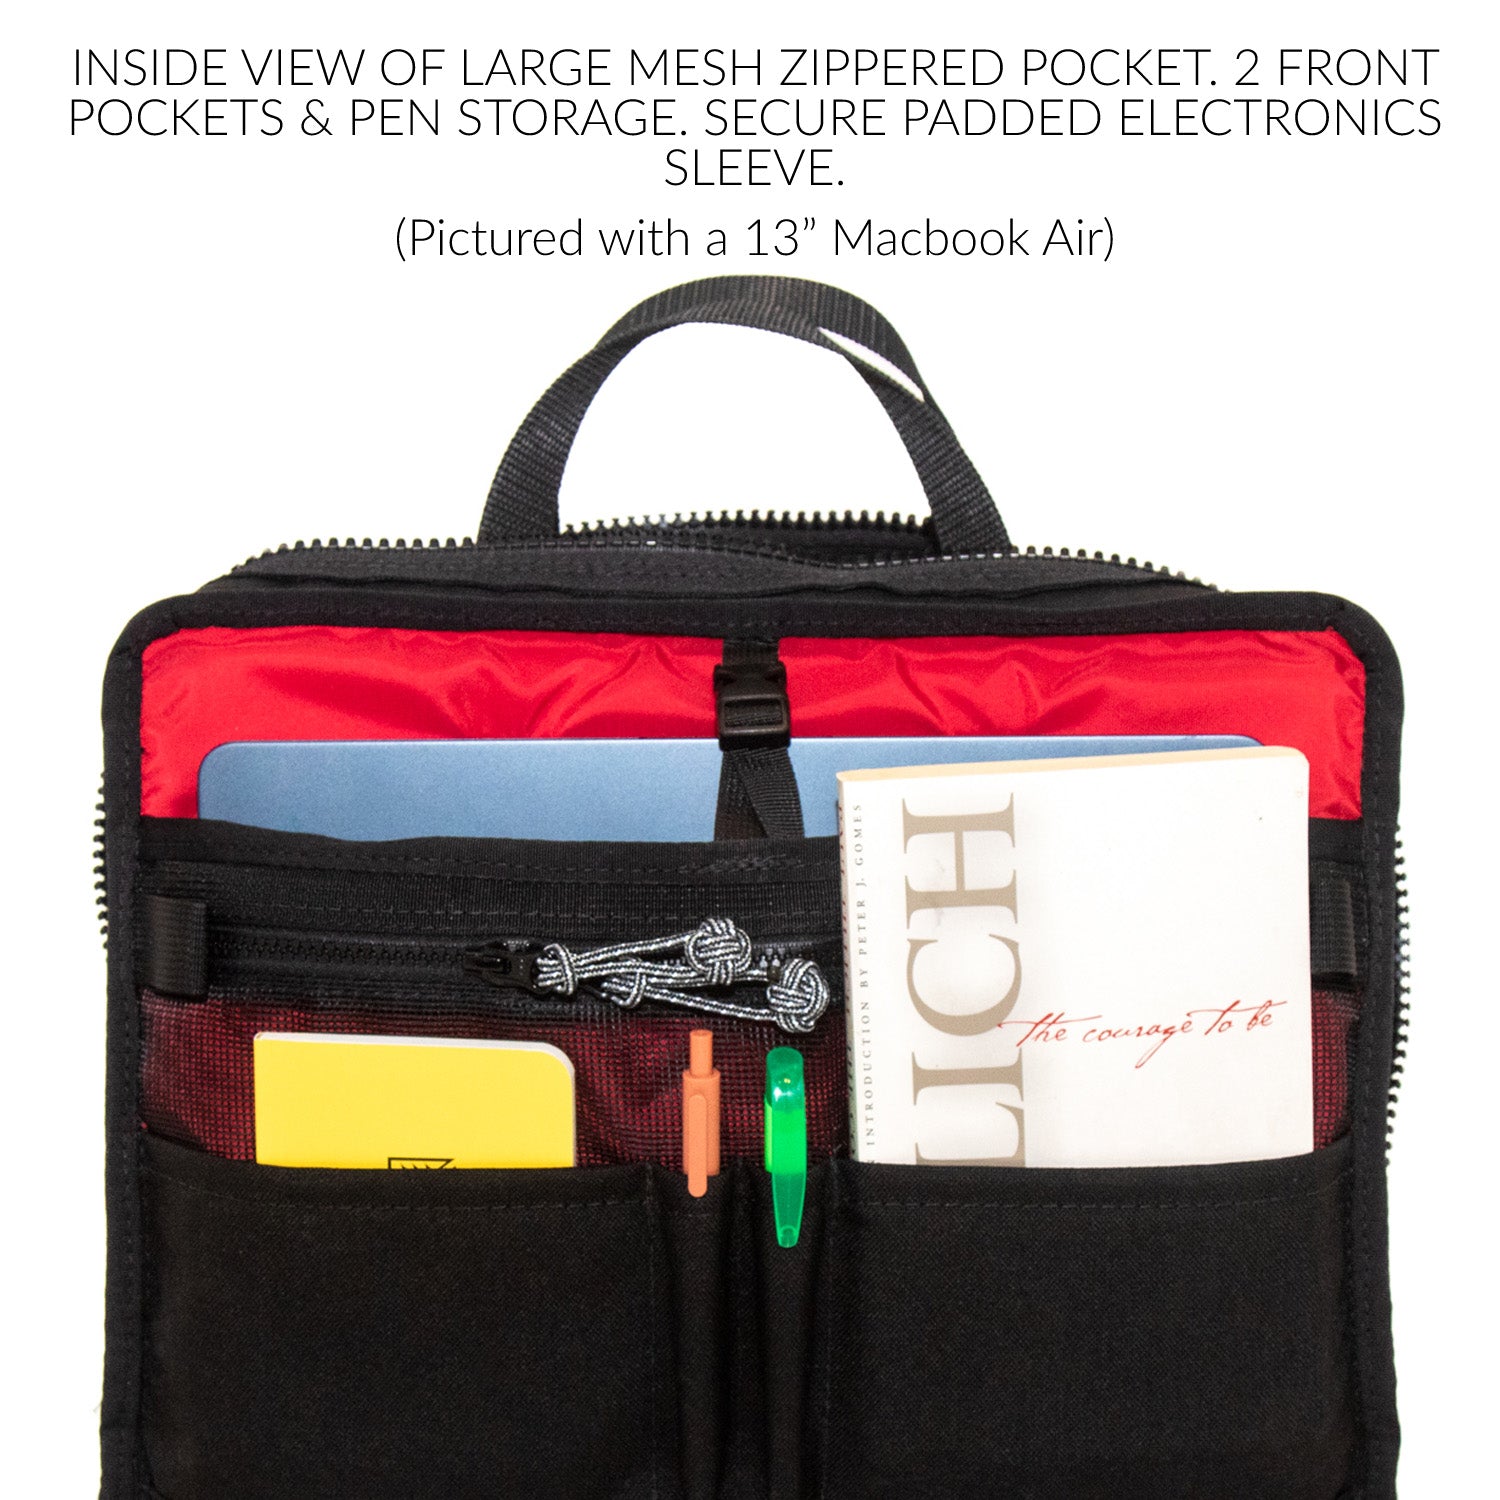 Inside view of large mesh zippered pocket. 2 front pockets & pen storage. Secure padded electronics sleeve.  Pictured with Macbook Air 13 inch